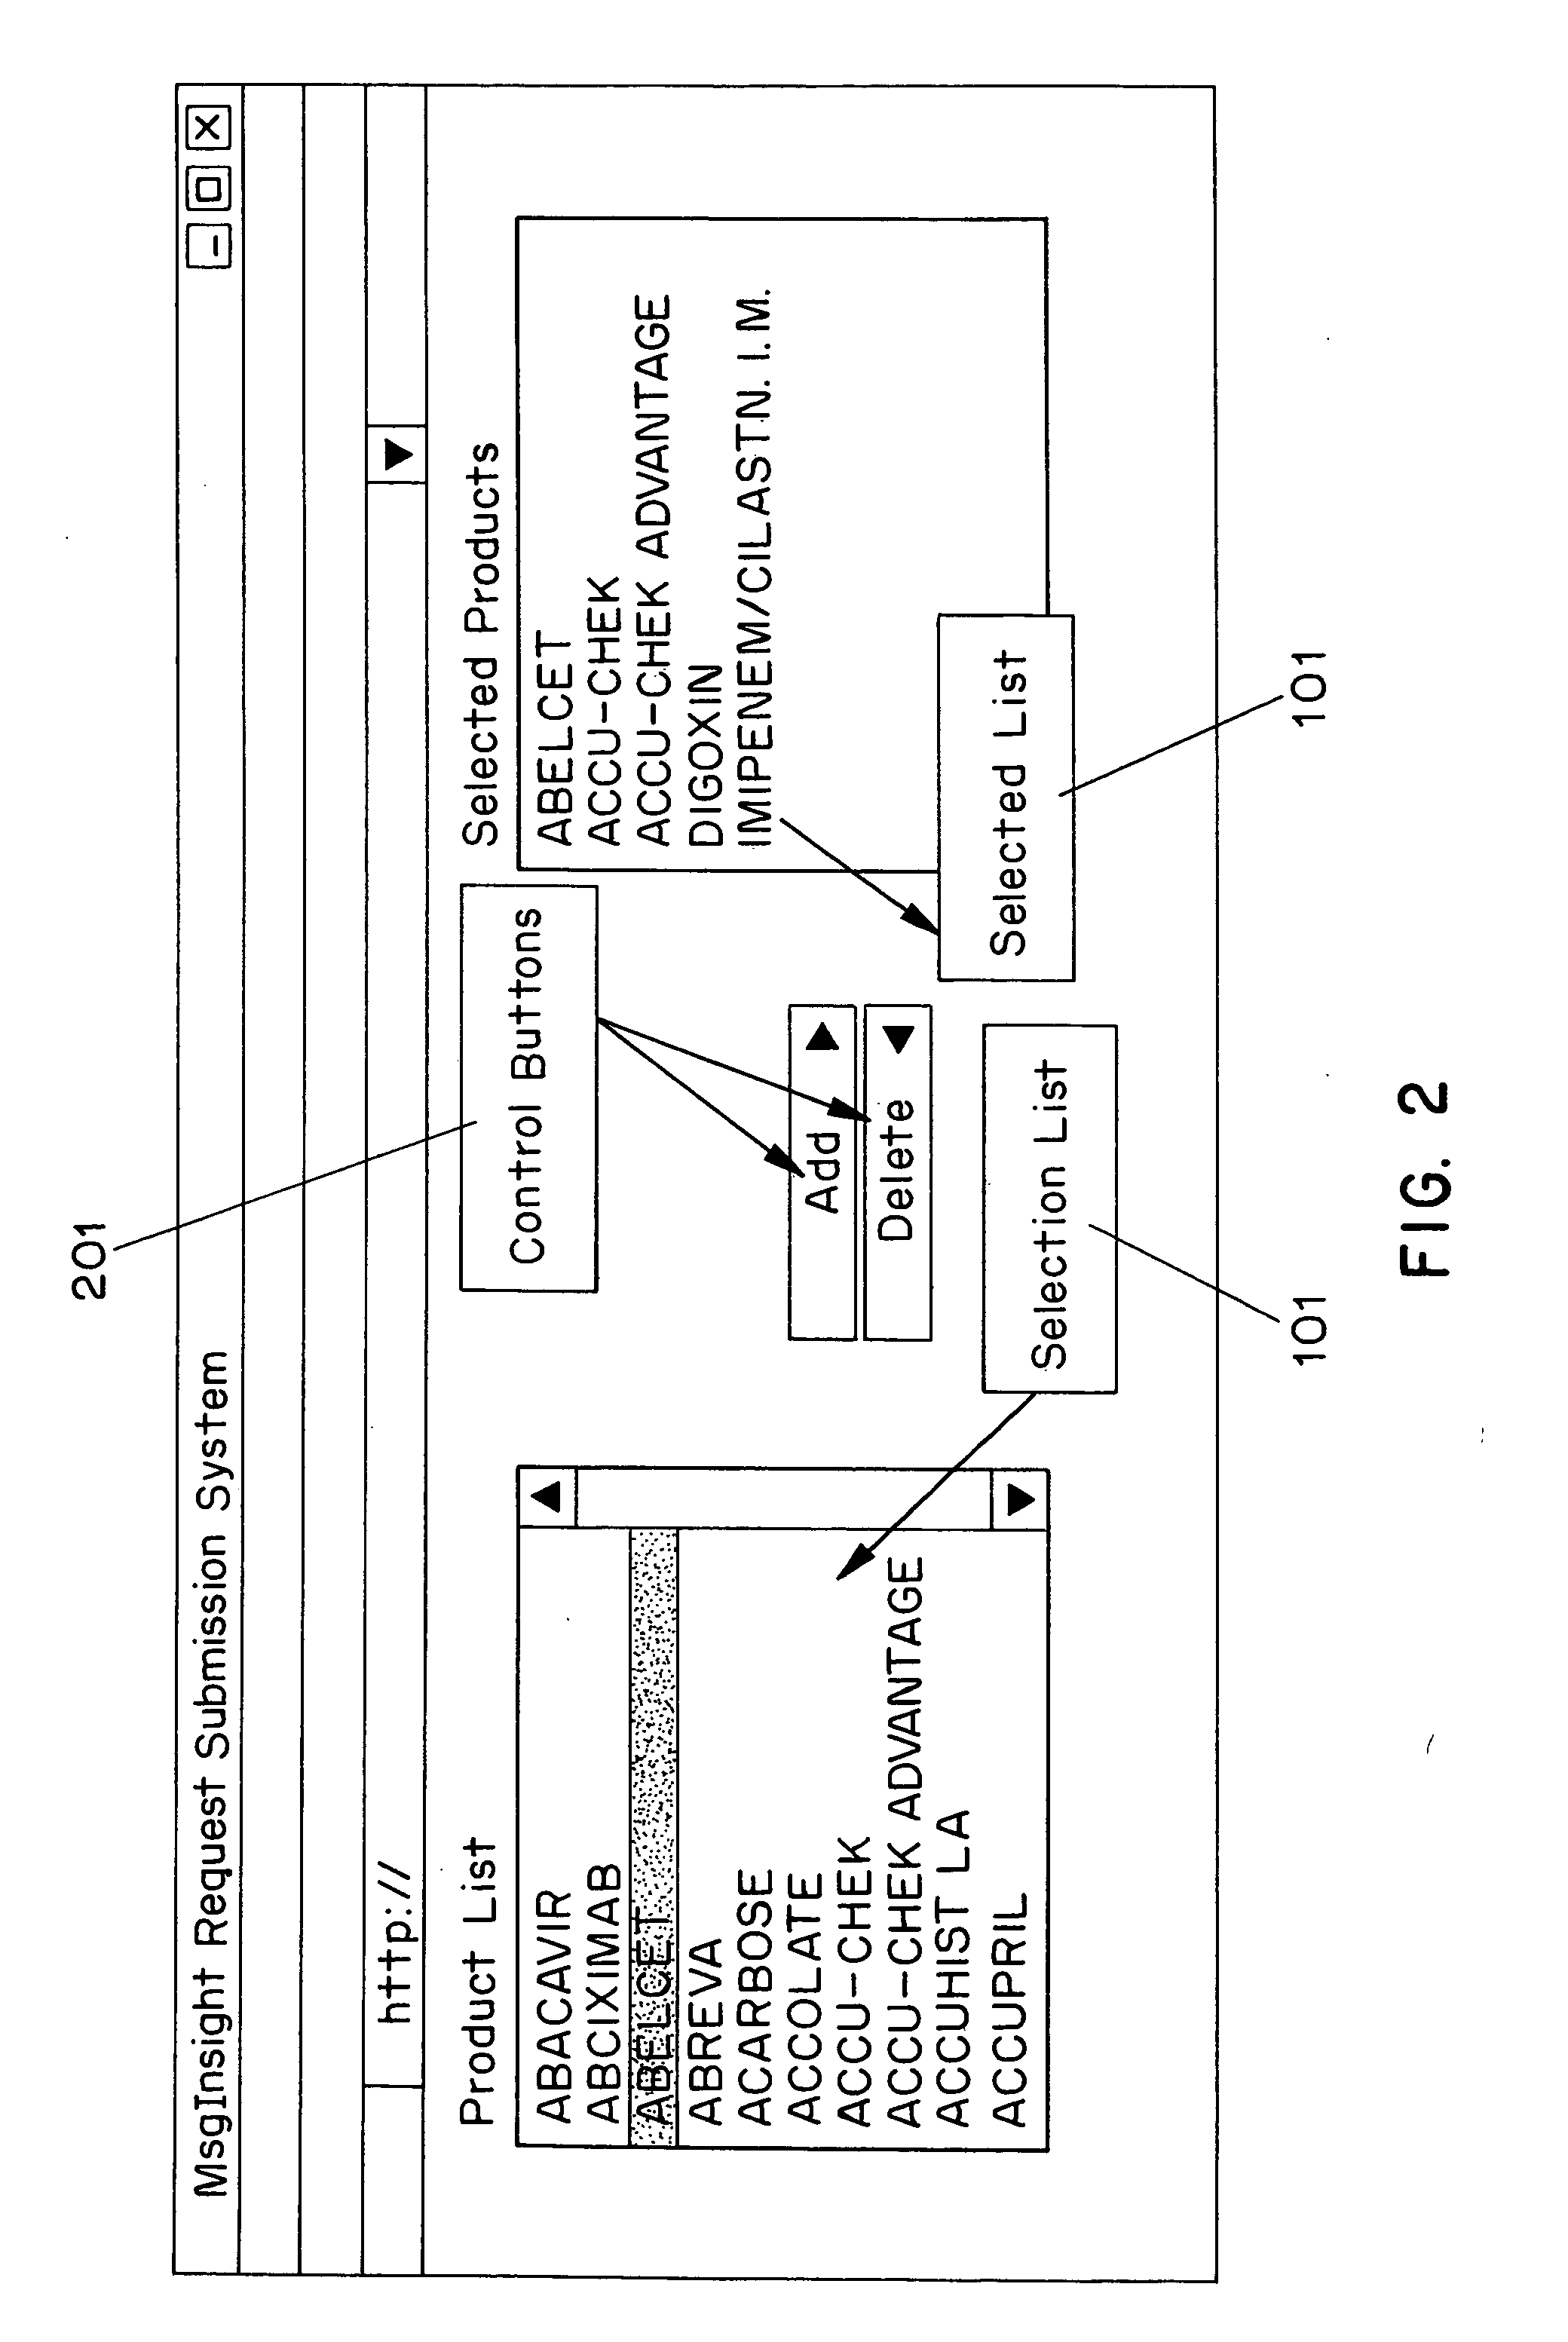 Method and system of displaying an instantaneous summary of selections of a listbox